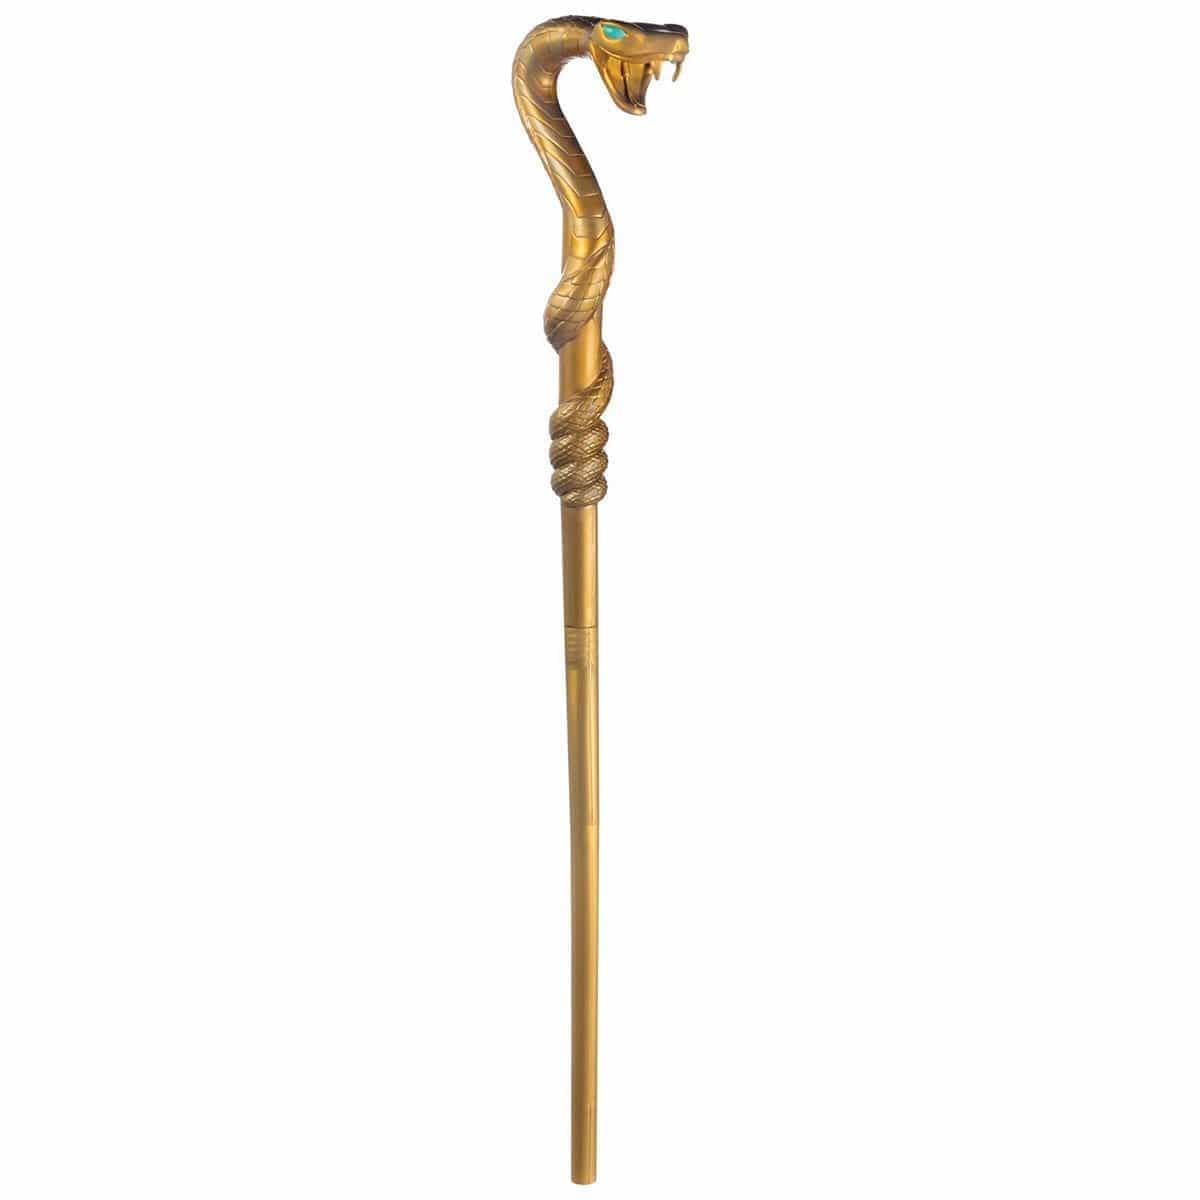 Buy Costume Accessories Gold Snake Staff sold at Party Expert